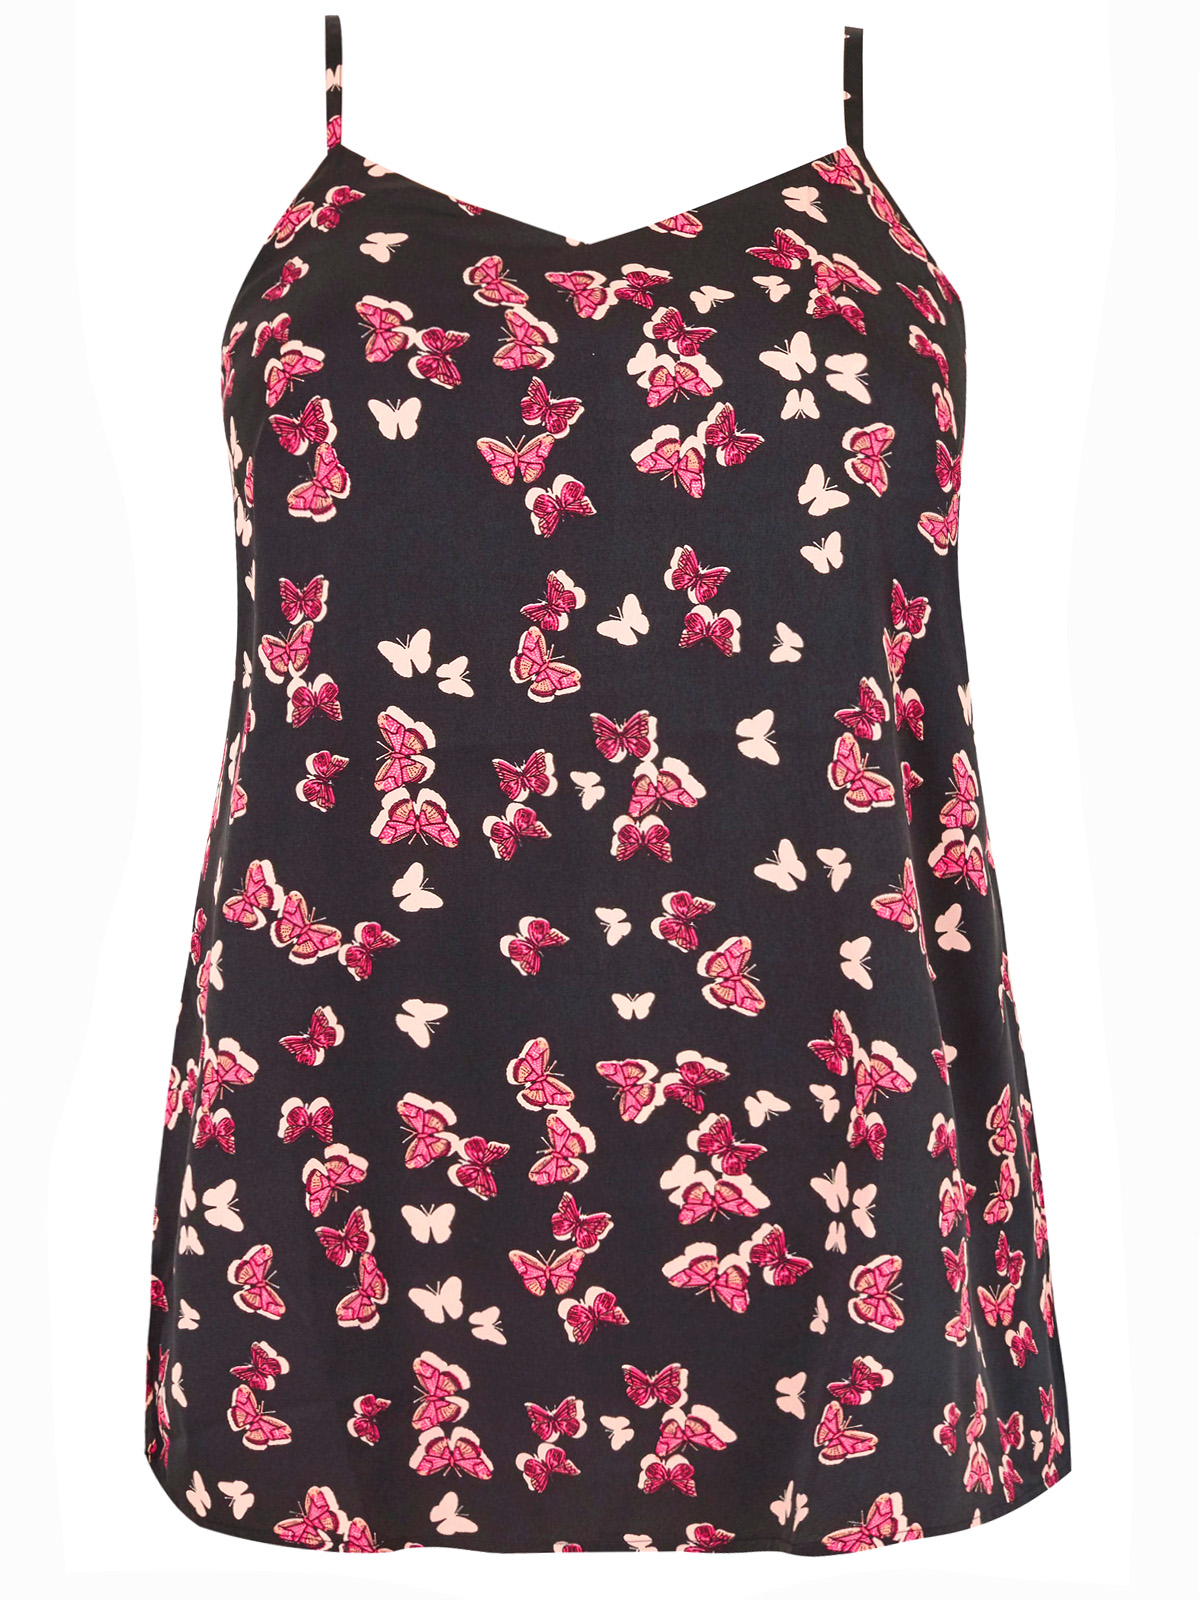 CURVE - - Yours BLACK Butterfly Print Woven Cami Top - Plus Size 16 to ...